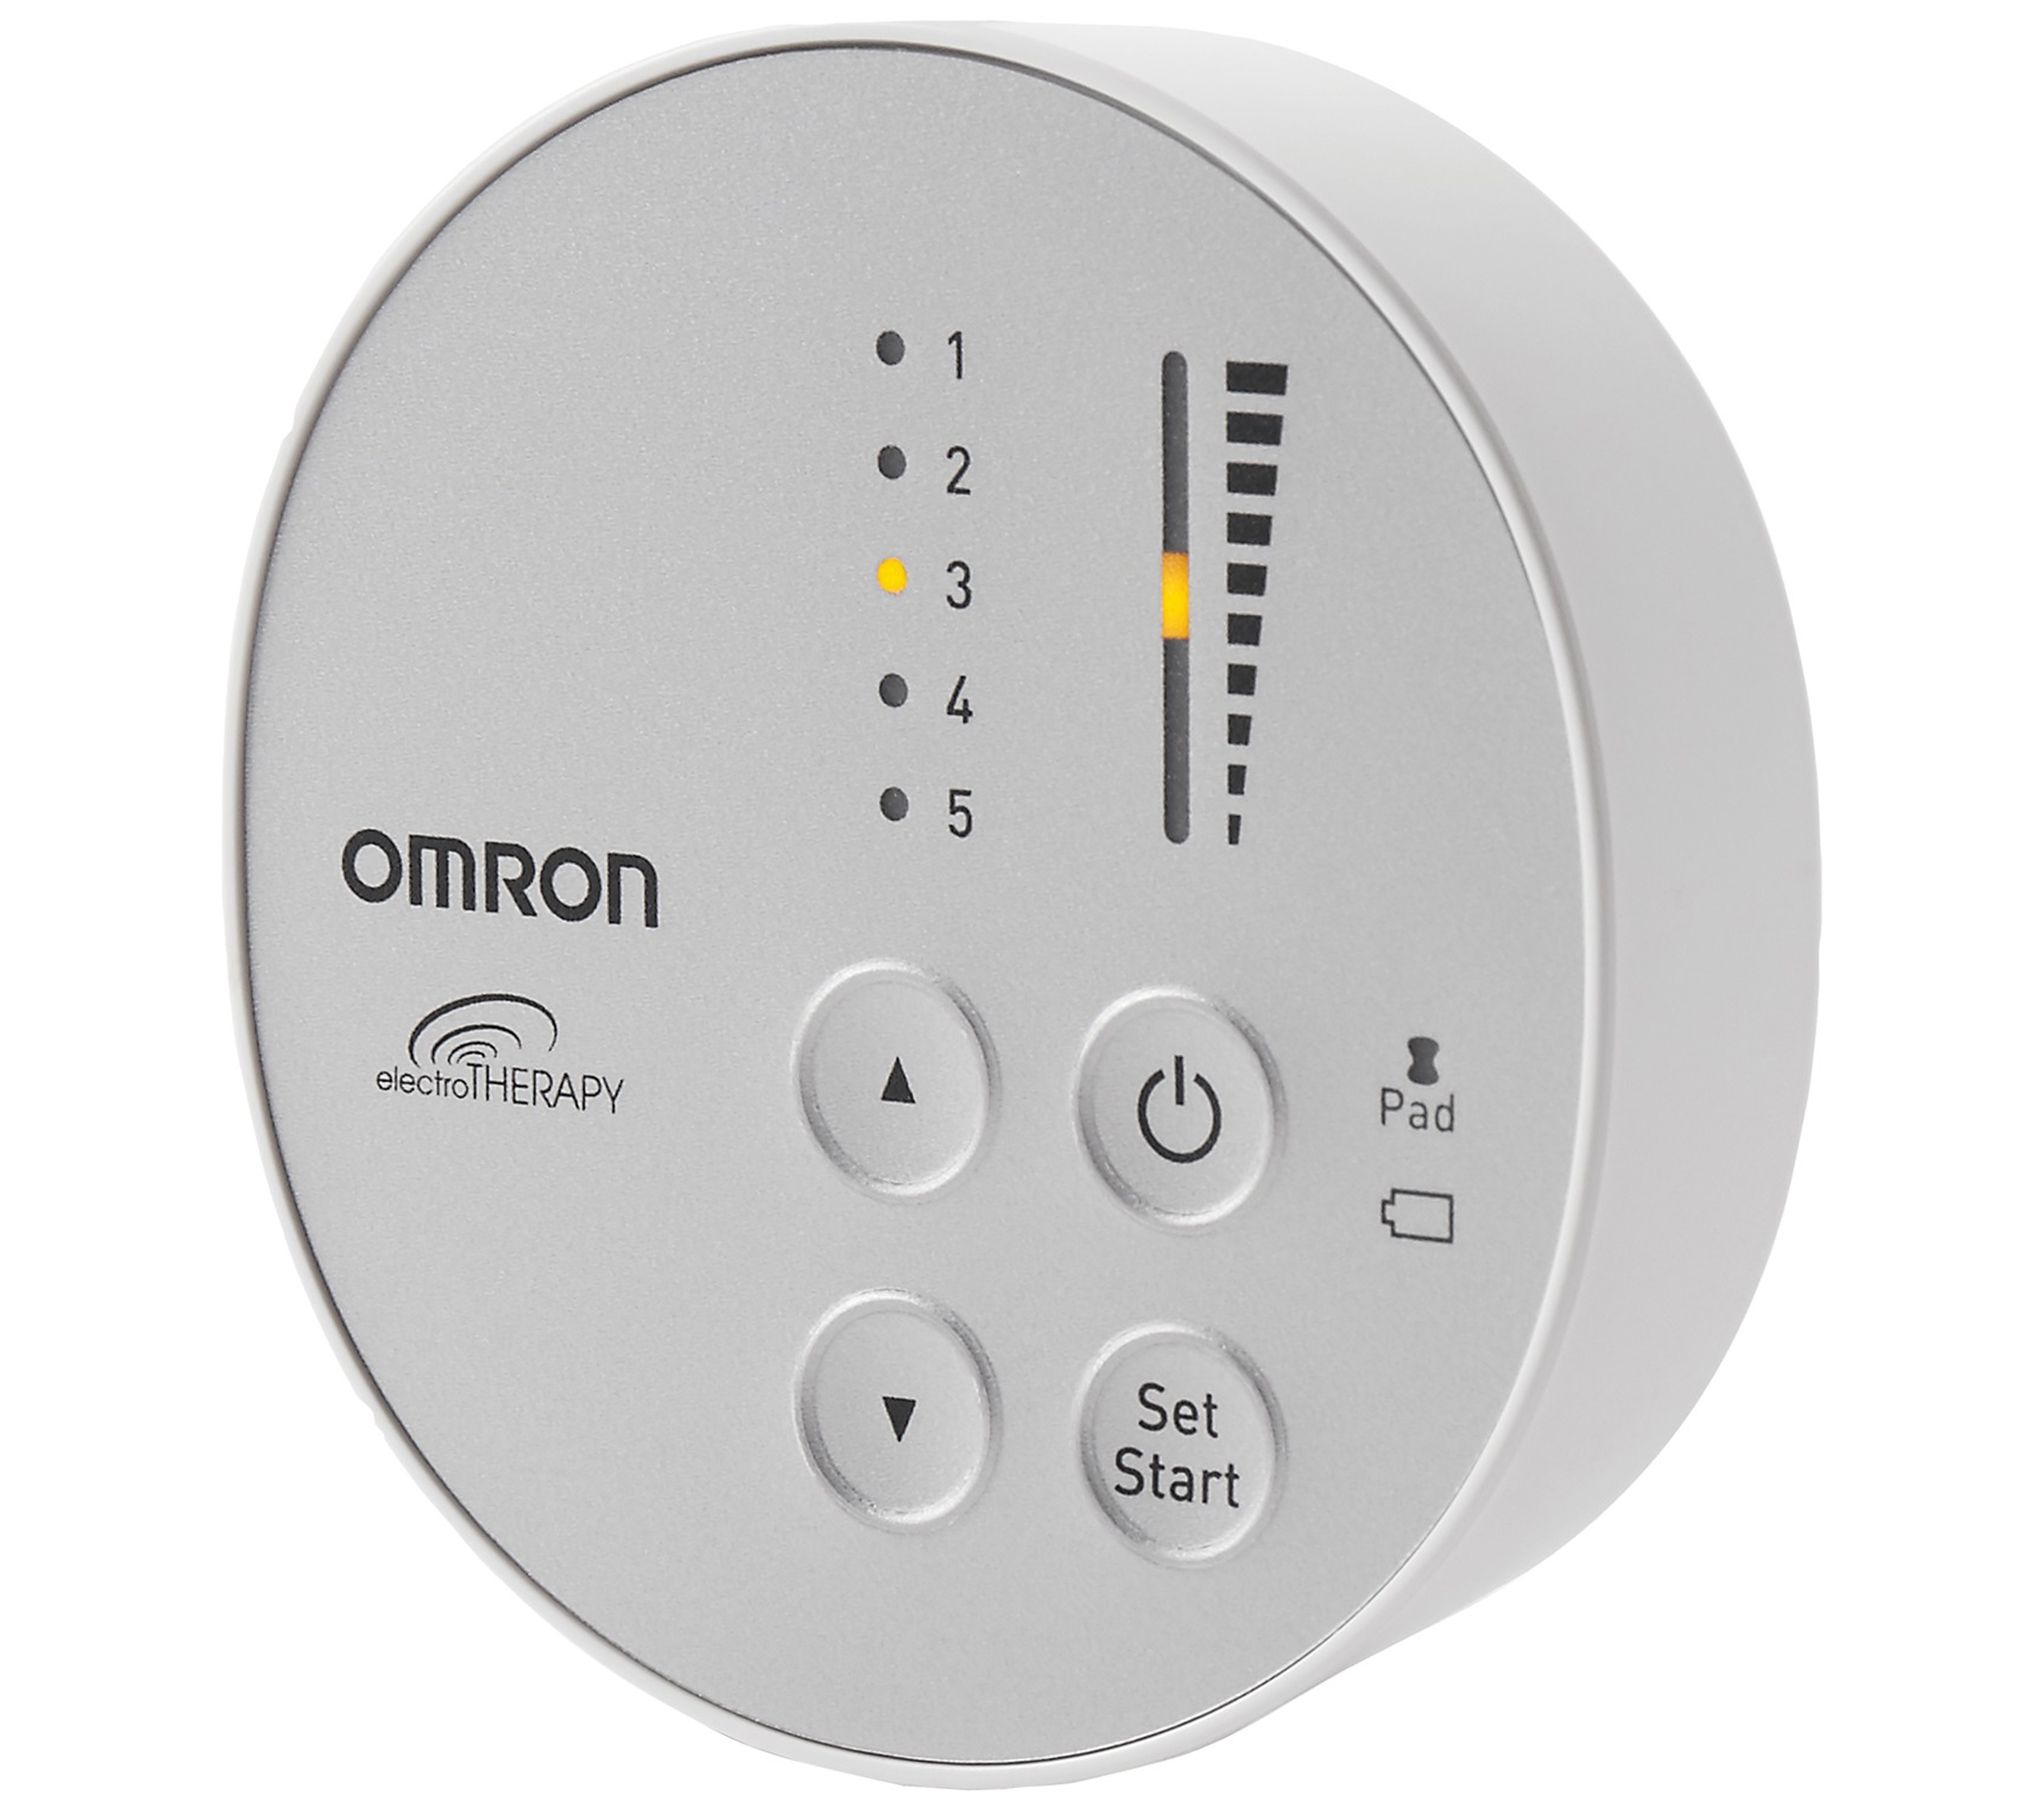 OMRON Total Power + Heat TENS Unit